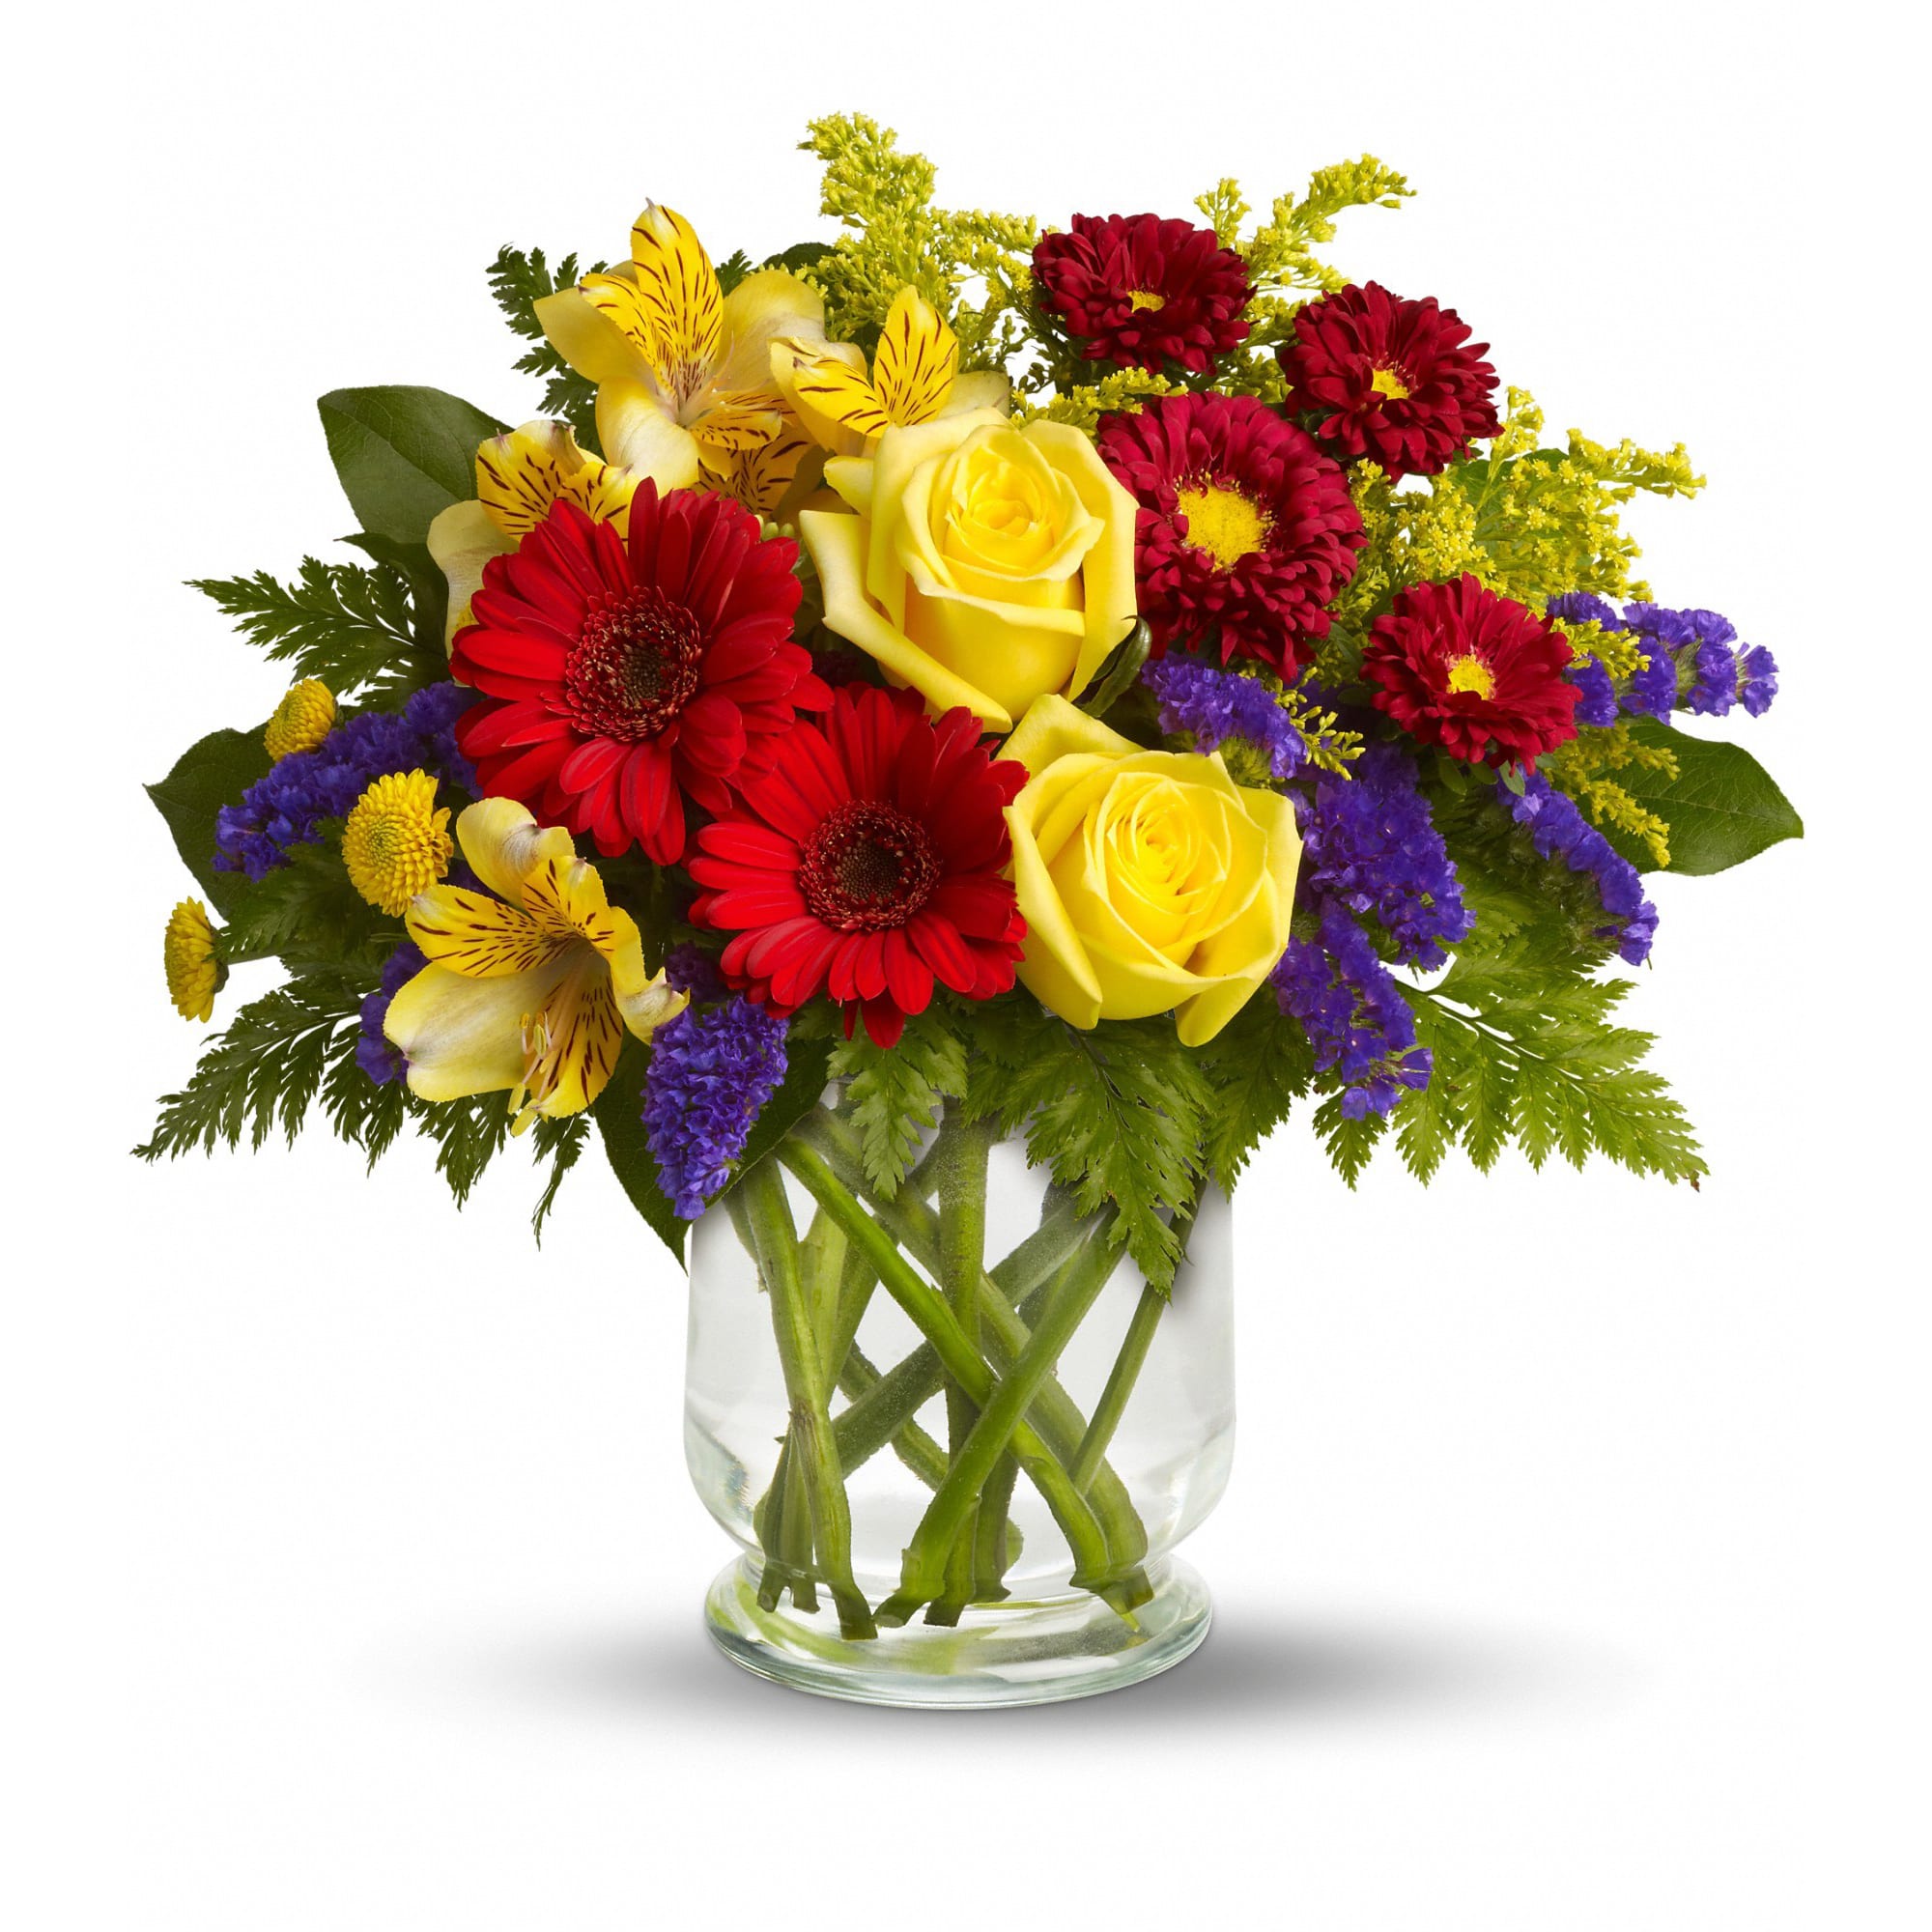 Garden Parade by Teleflora - You'll want to put this colorful bouquet on your hit parade of gifts to send. Bold primary colors and a perfect mix of flowers make it great for men and women of all ages. In other words, it's a perfect arrangement.